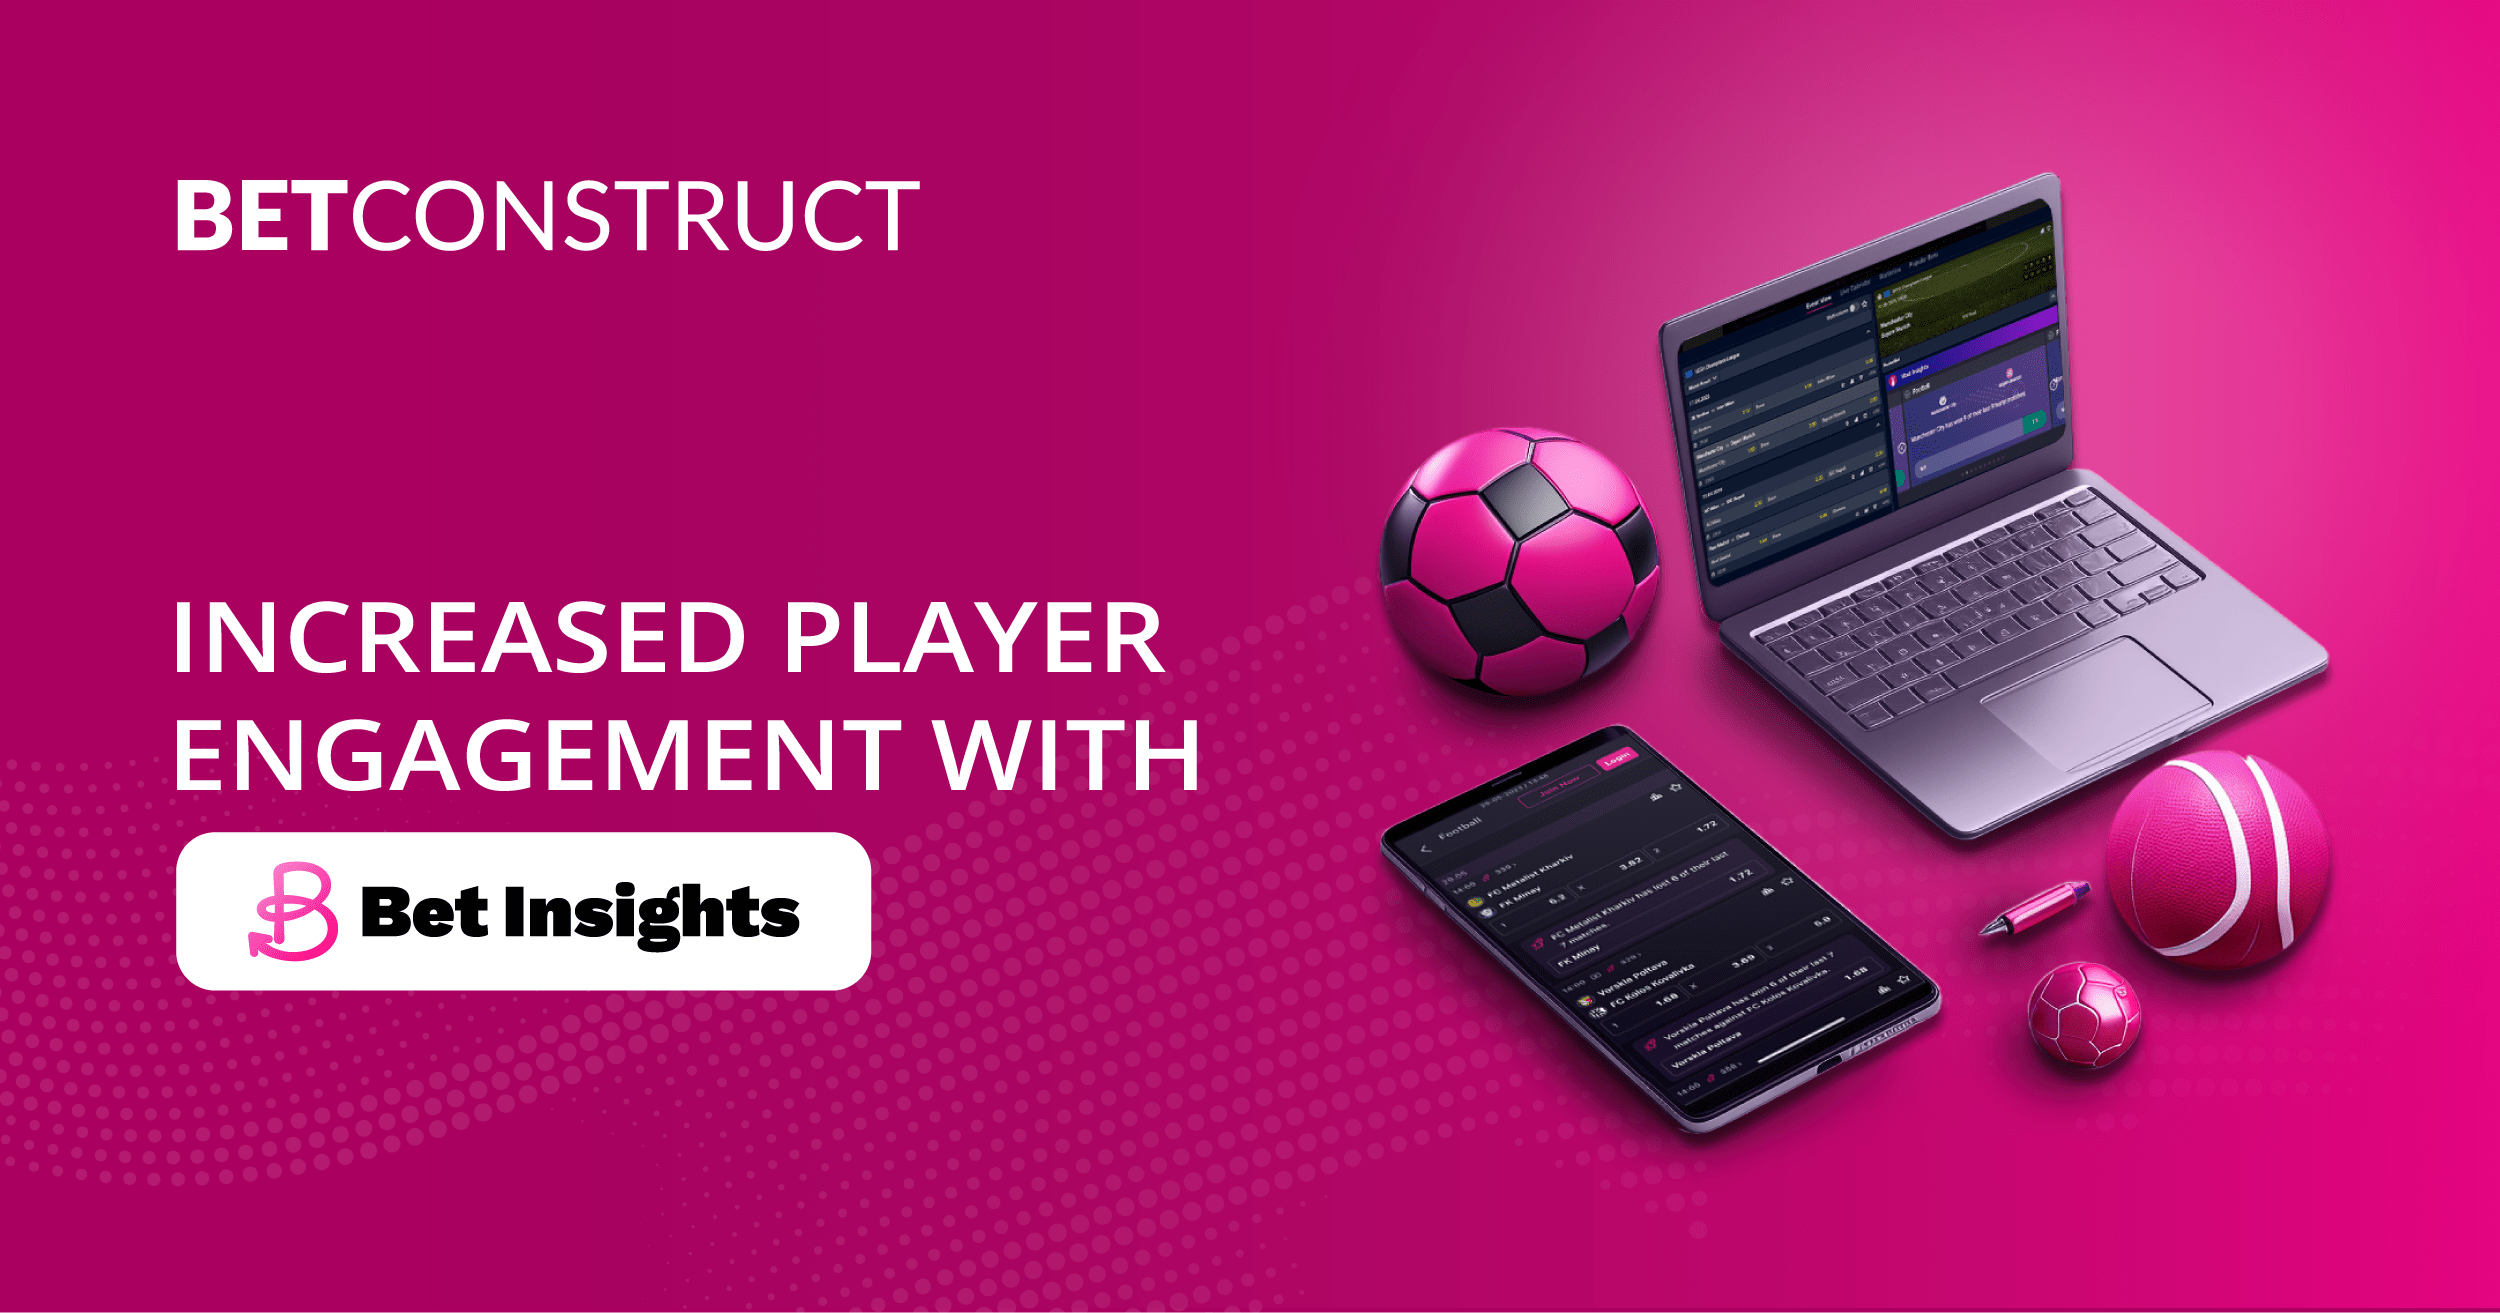 introducing-bet-insights:-betconstruct’s-latest-system-for-increased-player-engagement